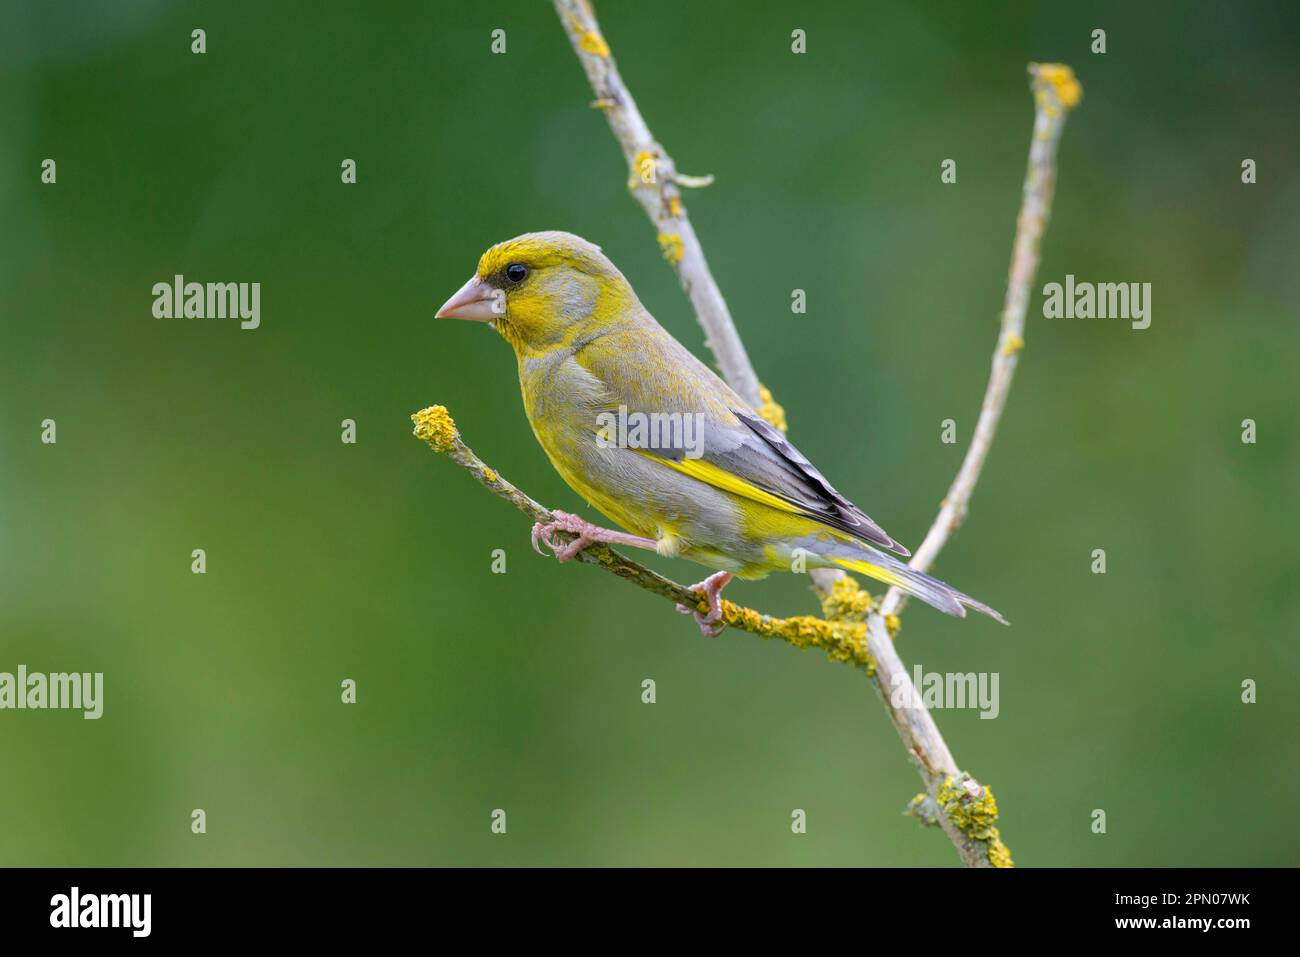 European Greenfinch (Carduelis chloris) adult male, perched on twig, Norfolk, England, United Kingdom Stock Photo